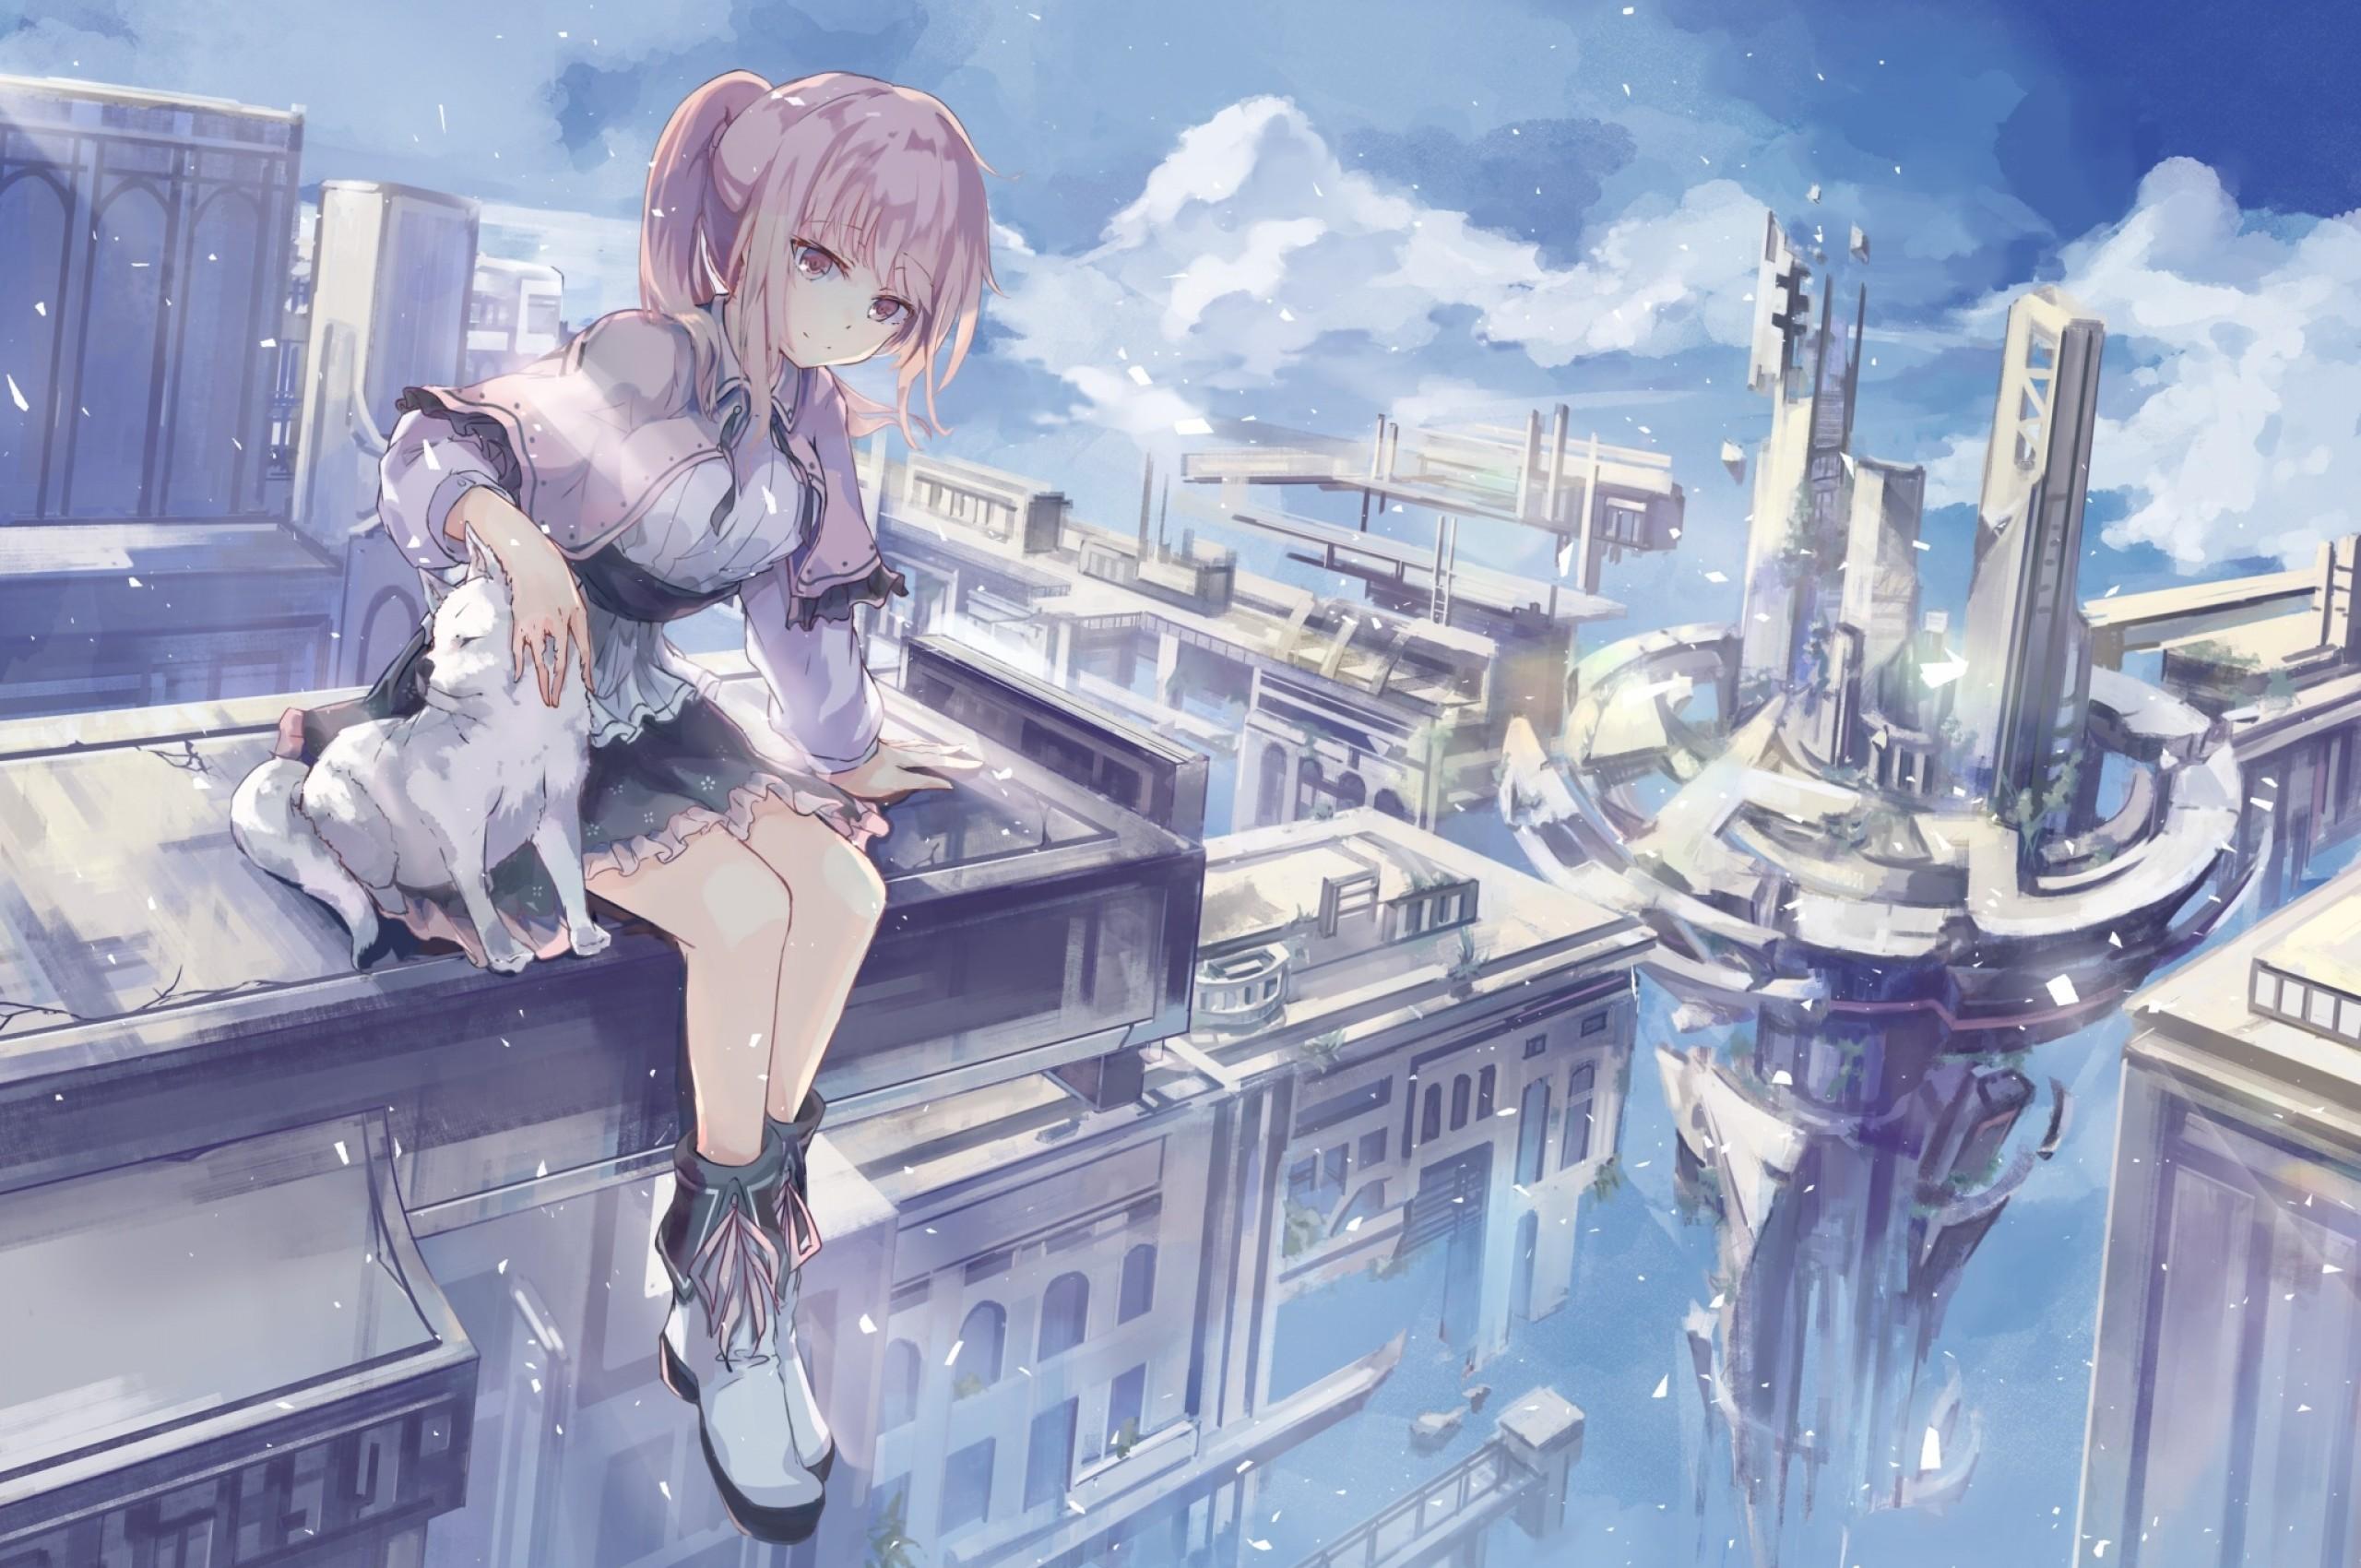 Download 2560x1700 Floating City, Fantasy World, Anime Girl, Pink